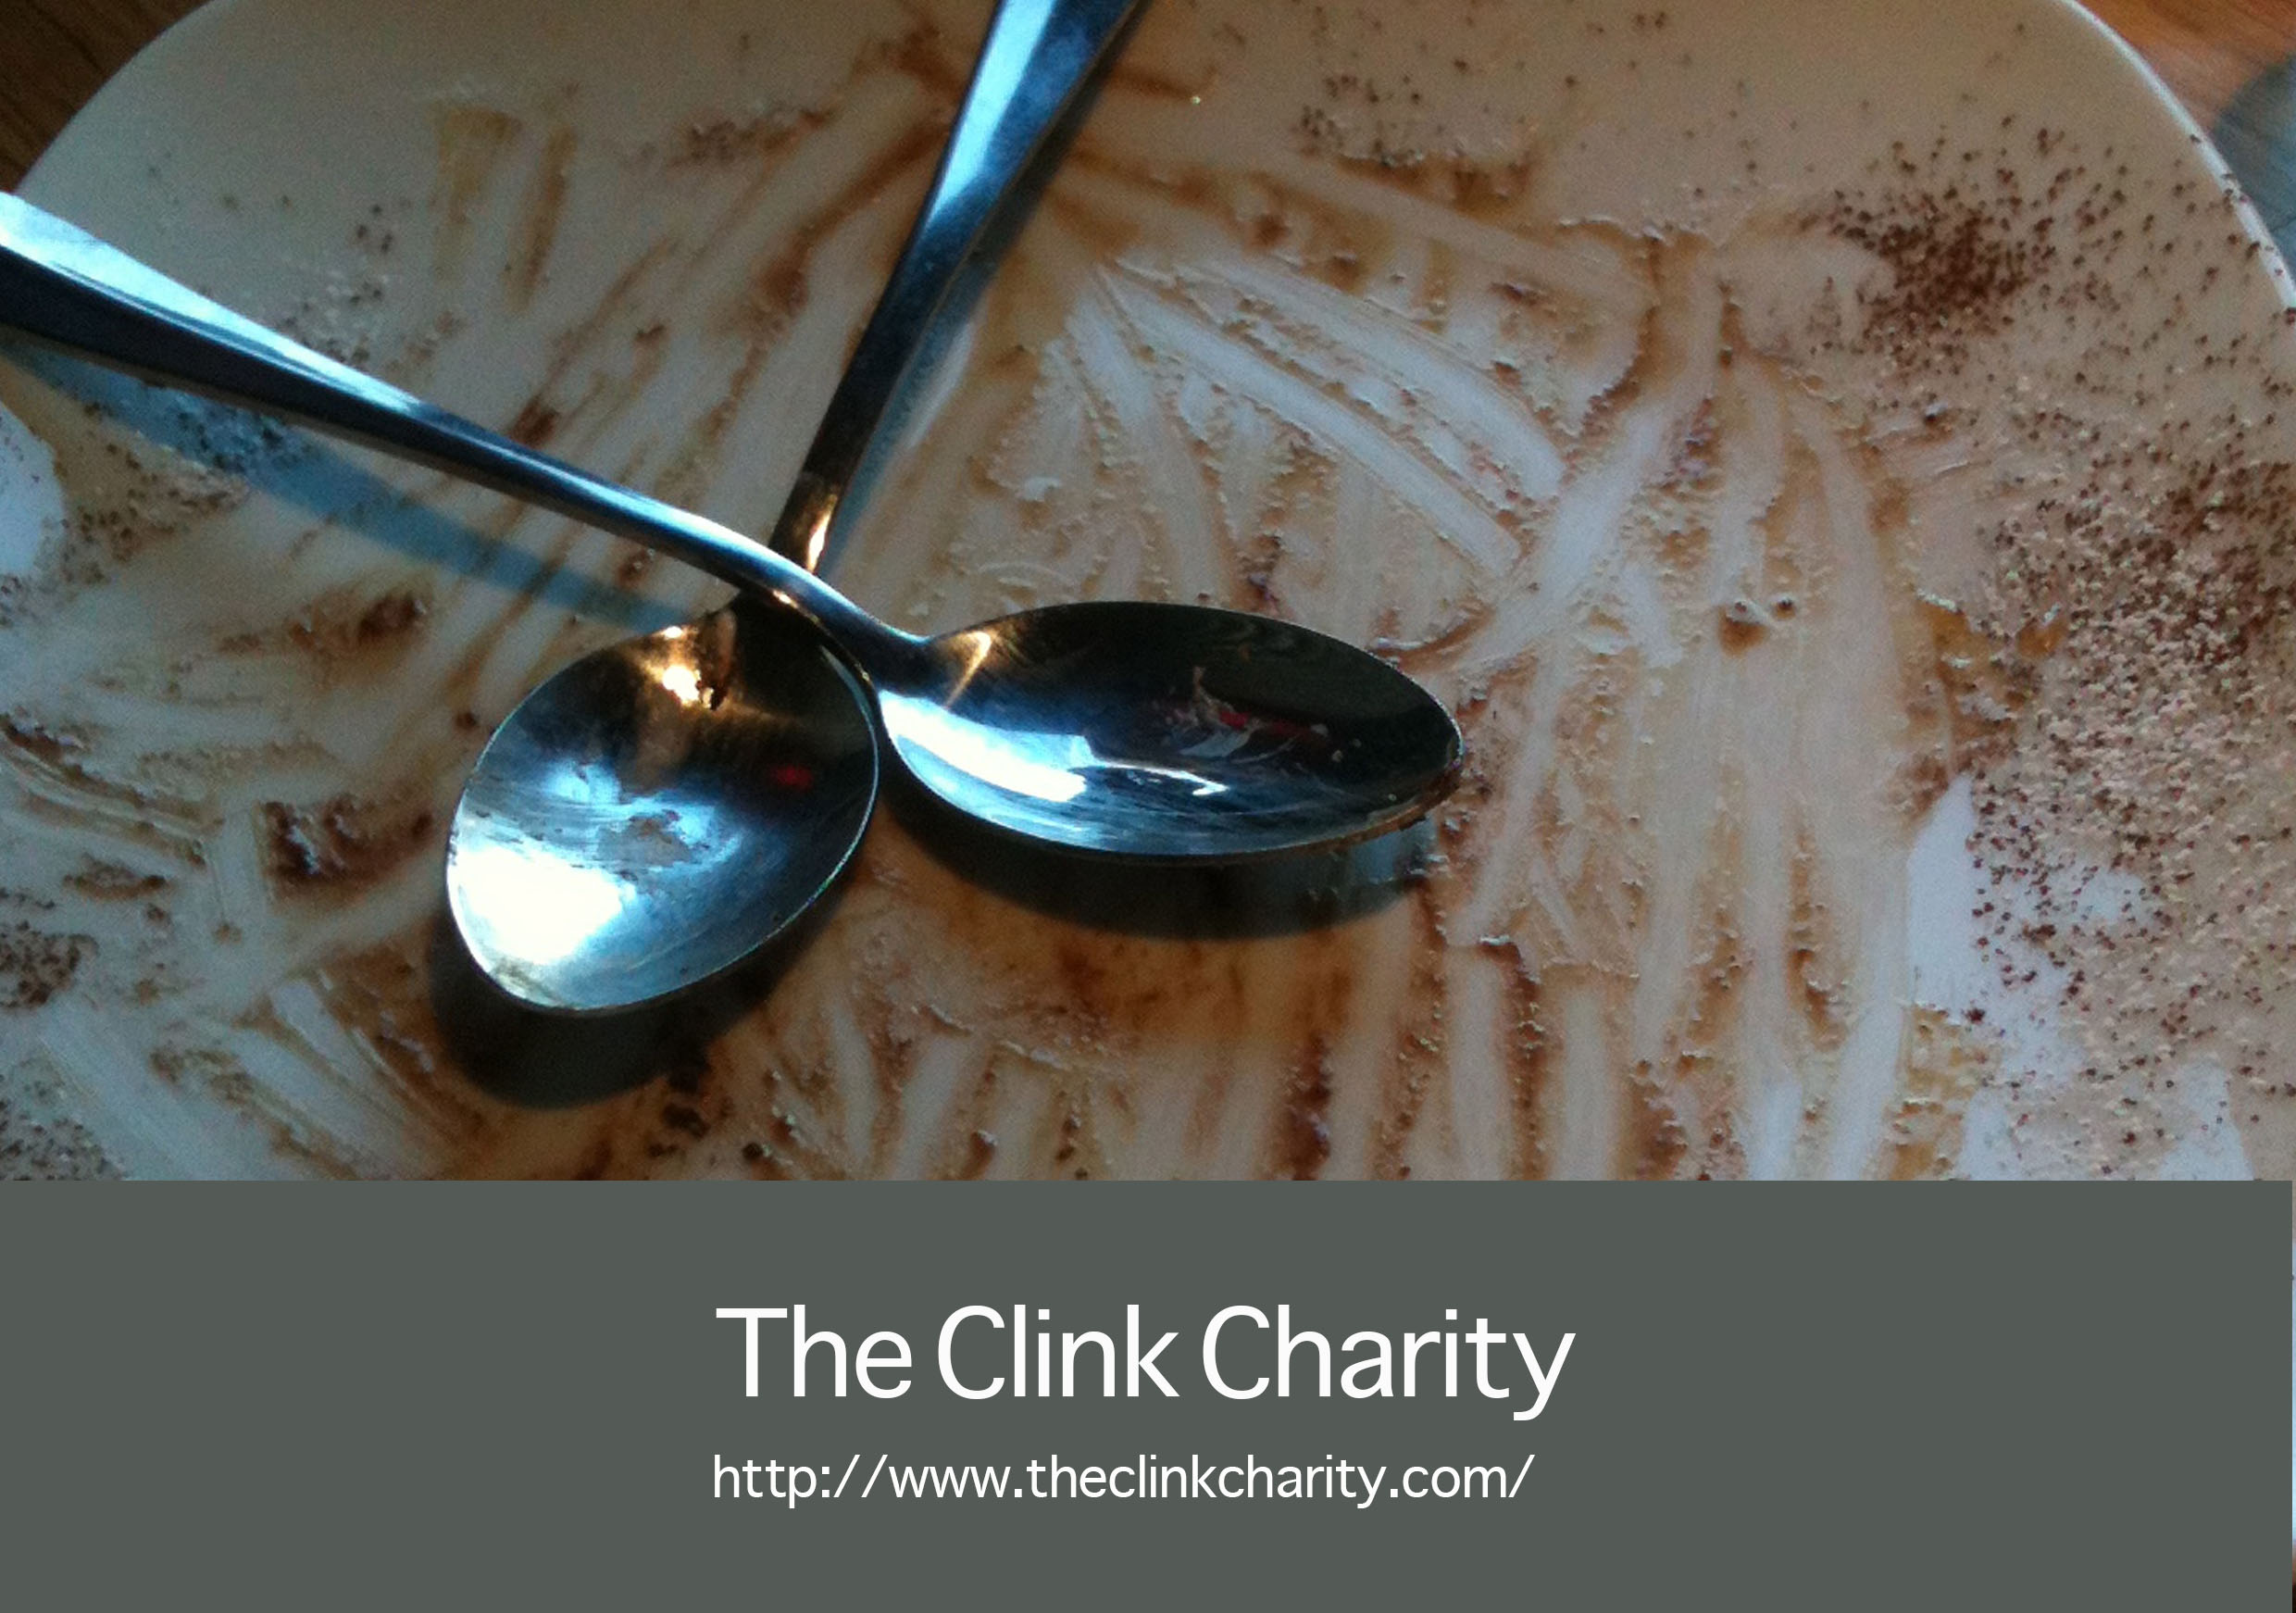 The Clink Charity Returns from Fighting Food Wastage in Rio